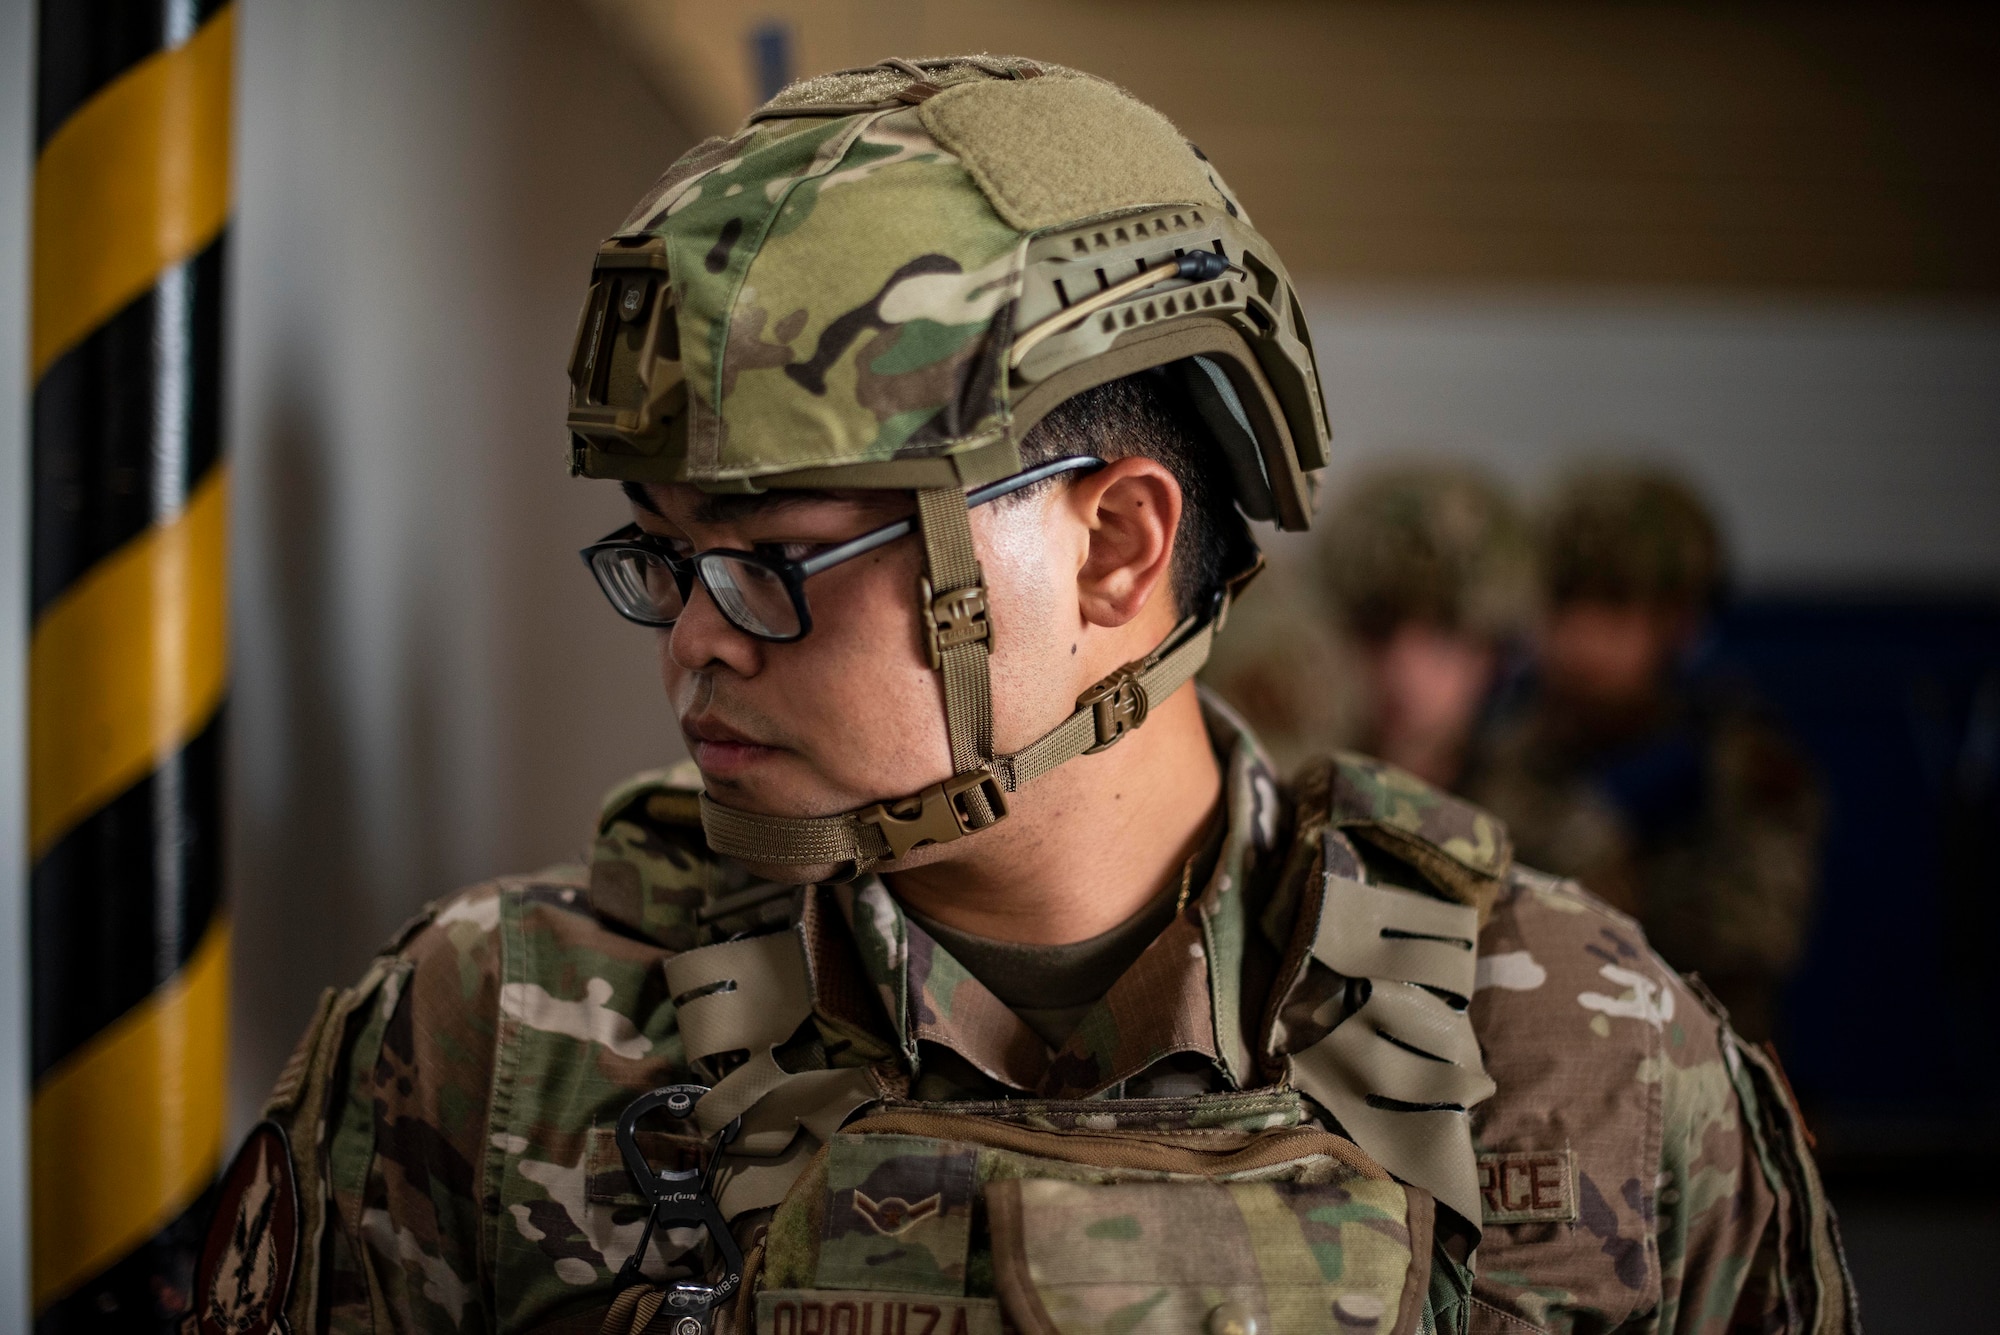 Airman Alex Orquiza, 71st Security Forces Squadron, wears a next generation ballistic helmet during a door-breaching exercise at Vance Air Force Base, Oklahoma, Sept. 15, 2020. The Air Force Security Forces Center at JBSA-Lackland, Texas, has delivered more than 27,000 helmets to security forces units as part of its effort to standardize and modernize Defender equipment across the Total Force. (U.S. Air Force photo by Senior Airman Taylor Crul)